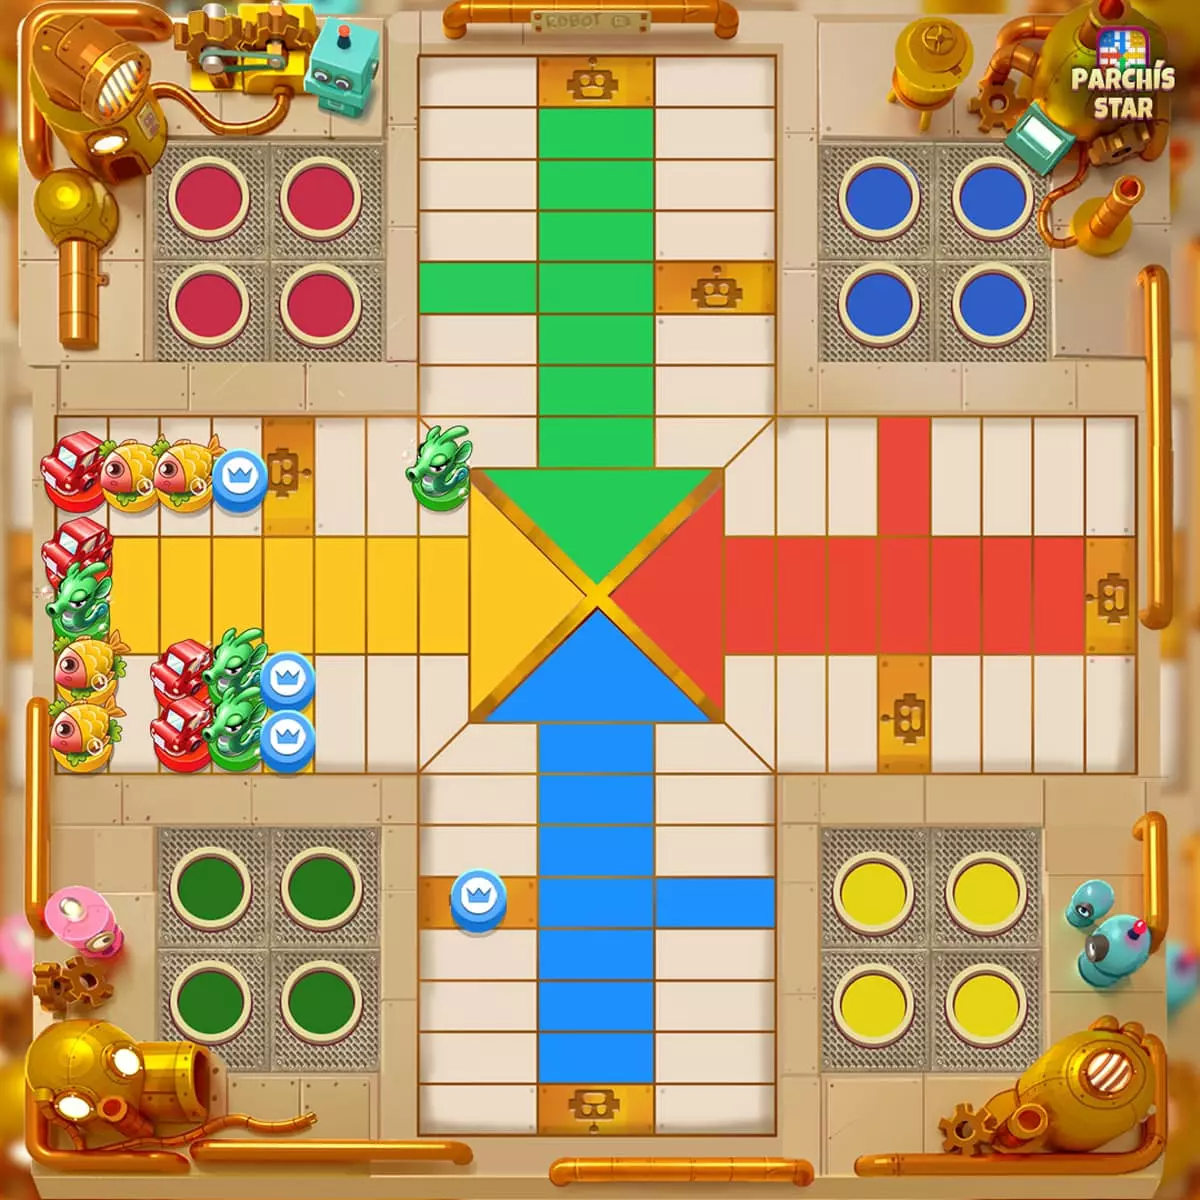 7 strategies to win as a team in Parcheesi Star 2